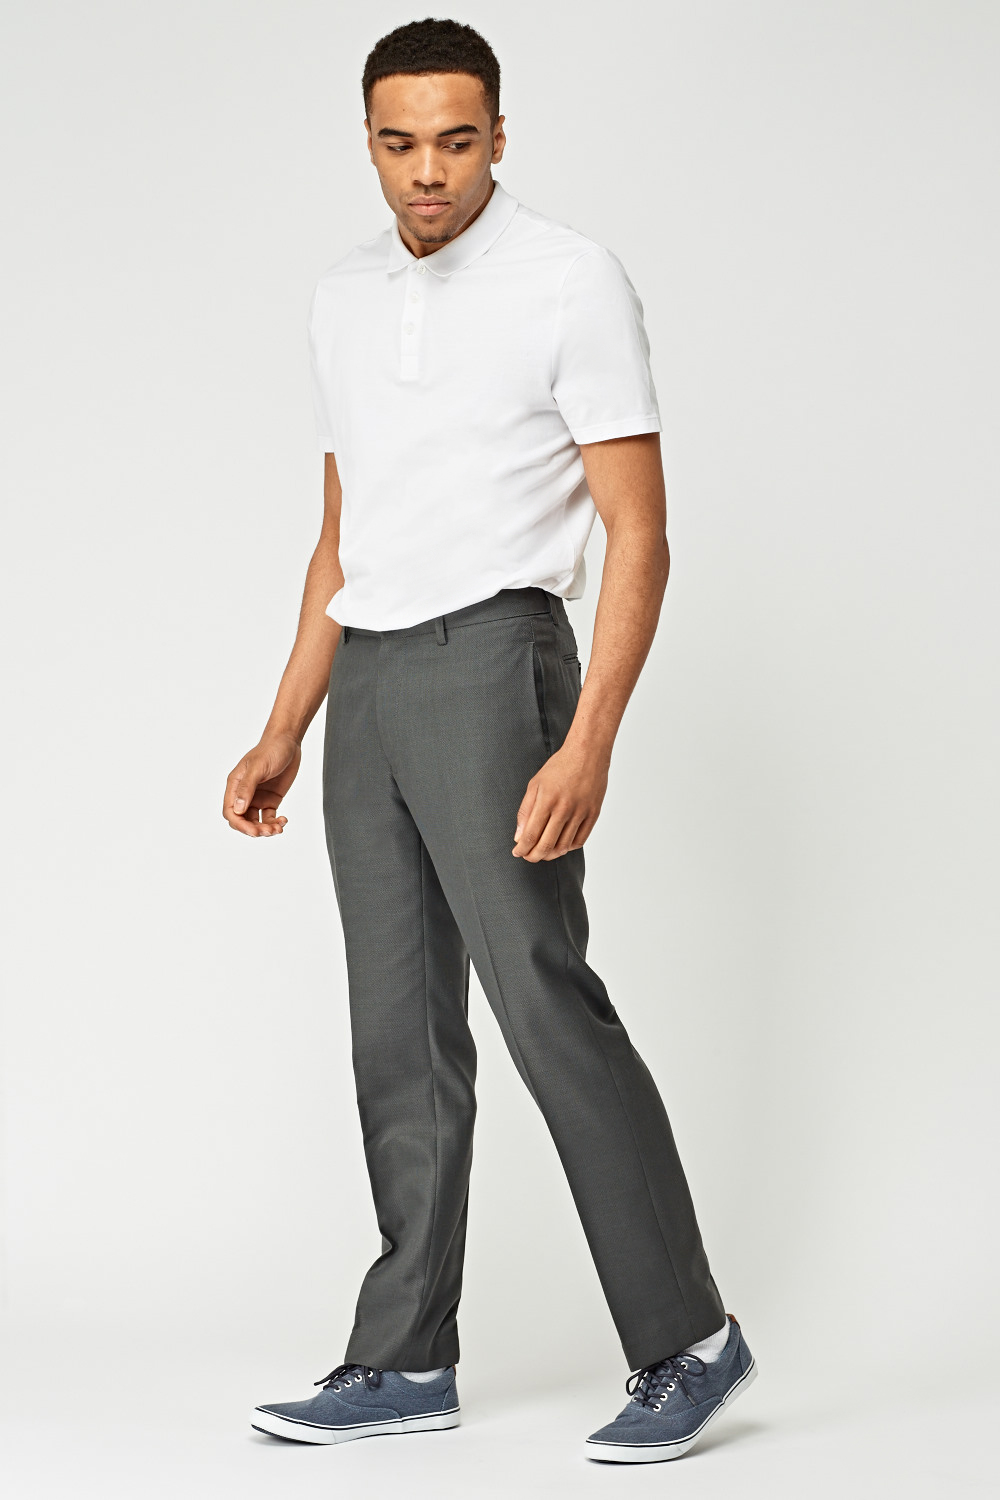 Tailored Mens Trousers - Just $3